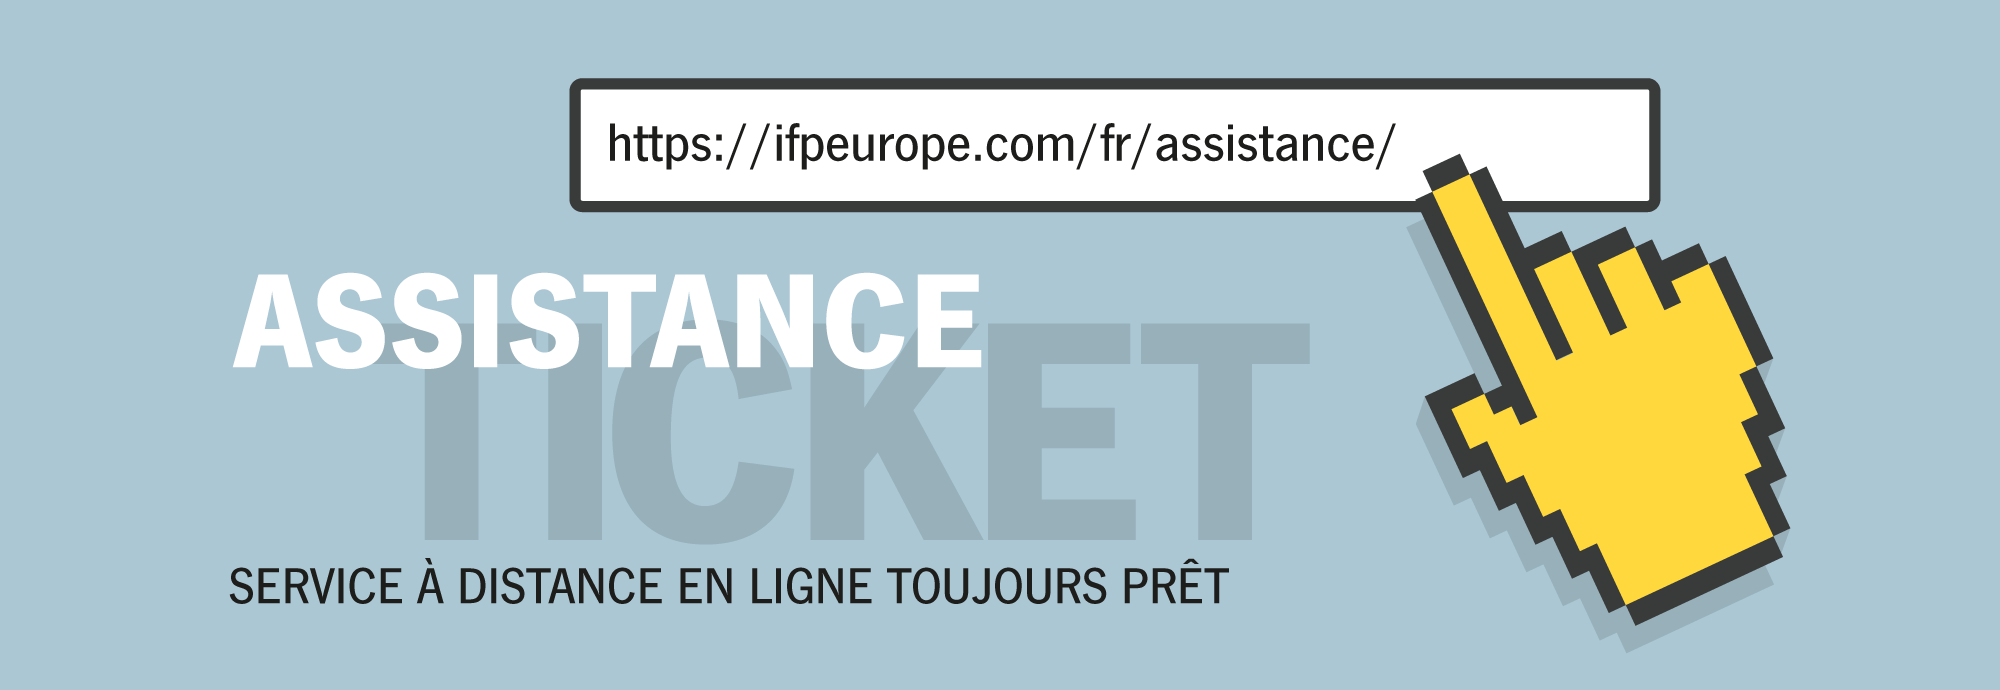 IFP Europe - Assistance